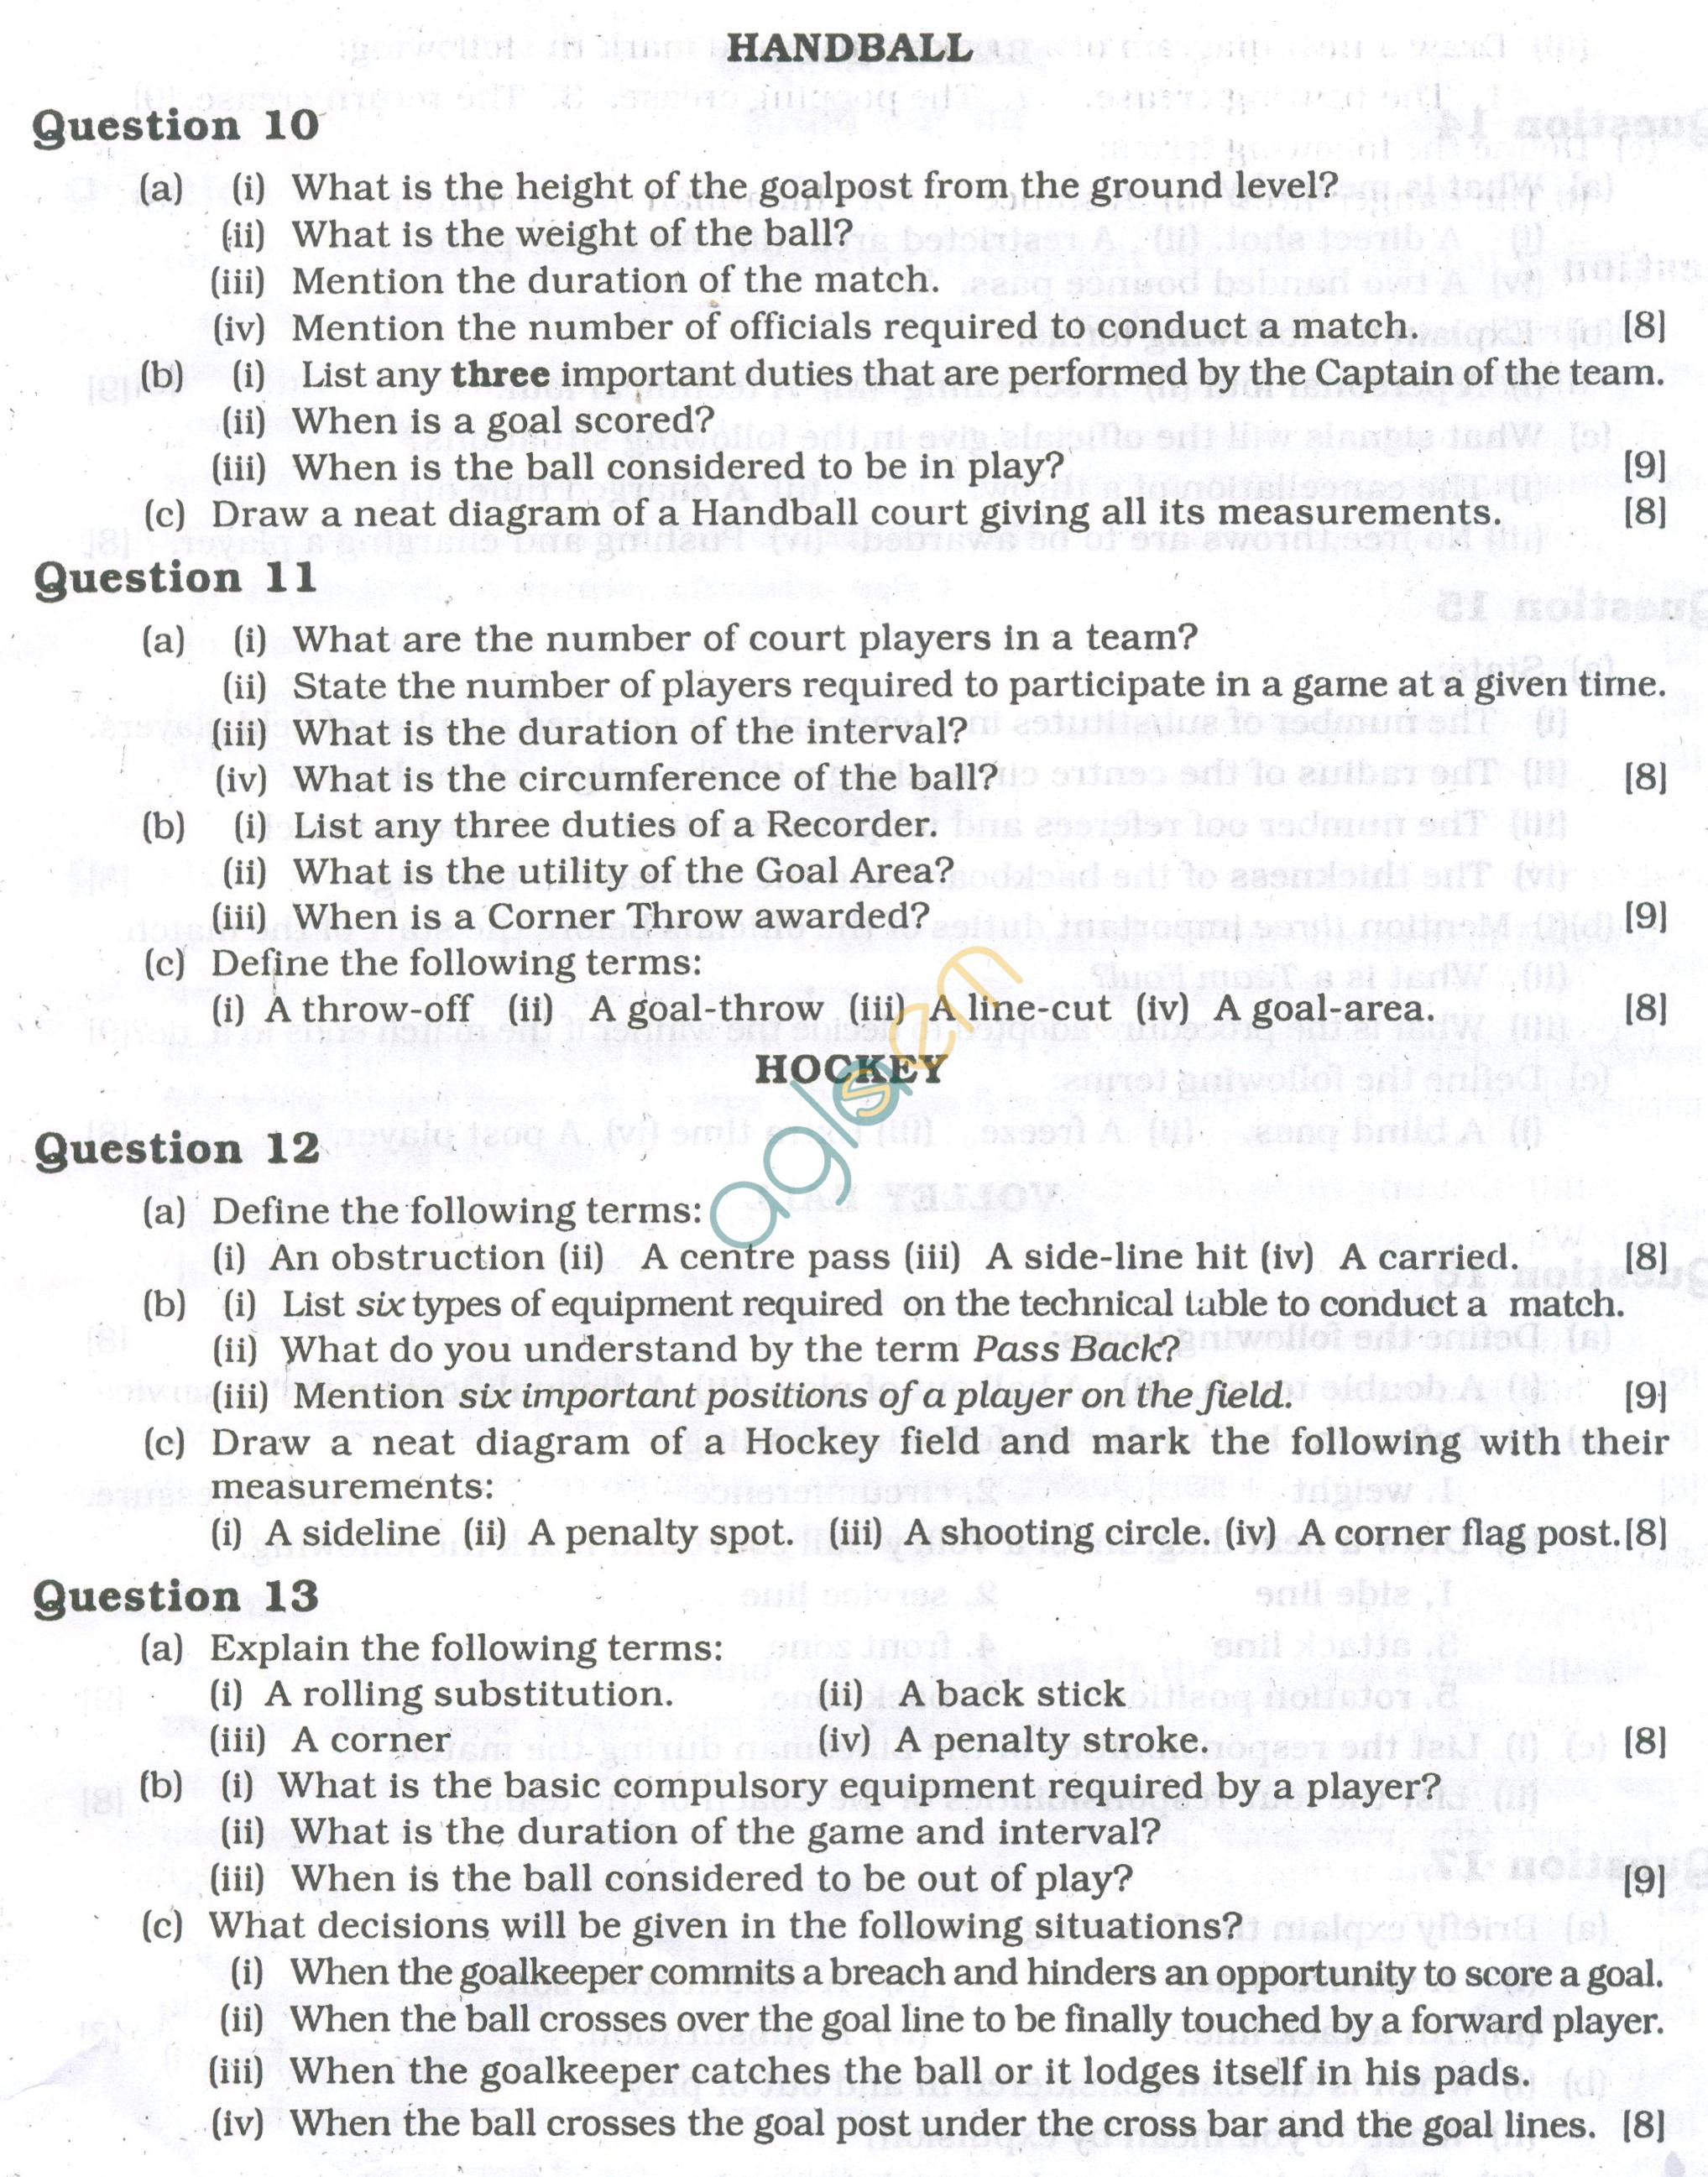 ICSE Question Papers 2013 for Class 10 - Physical Education/